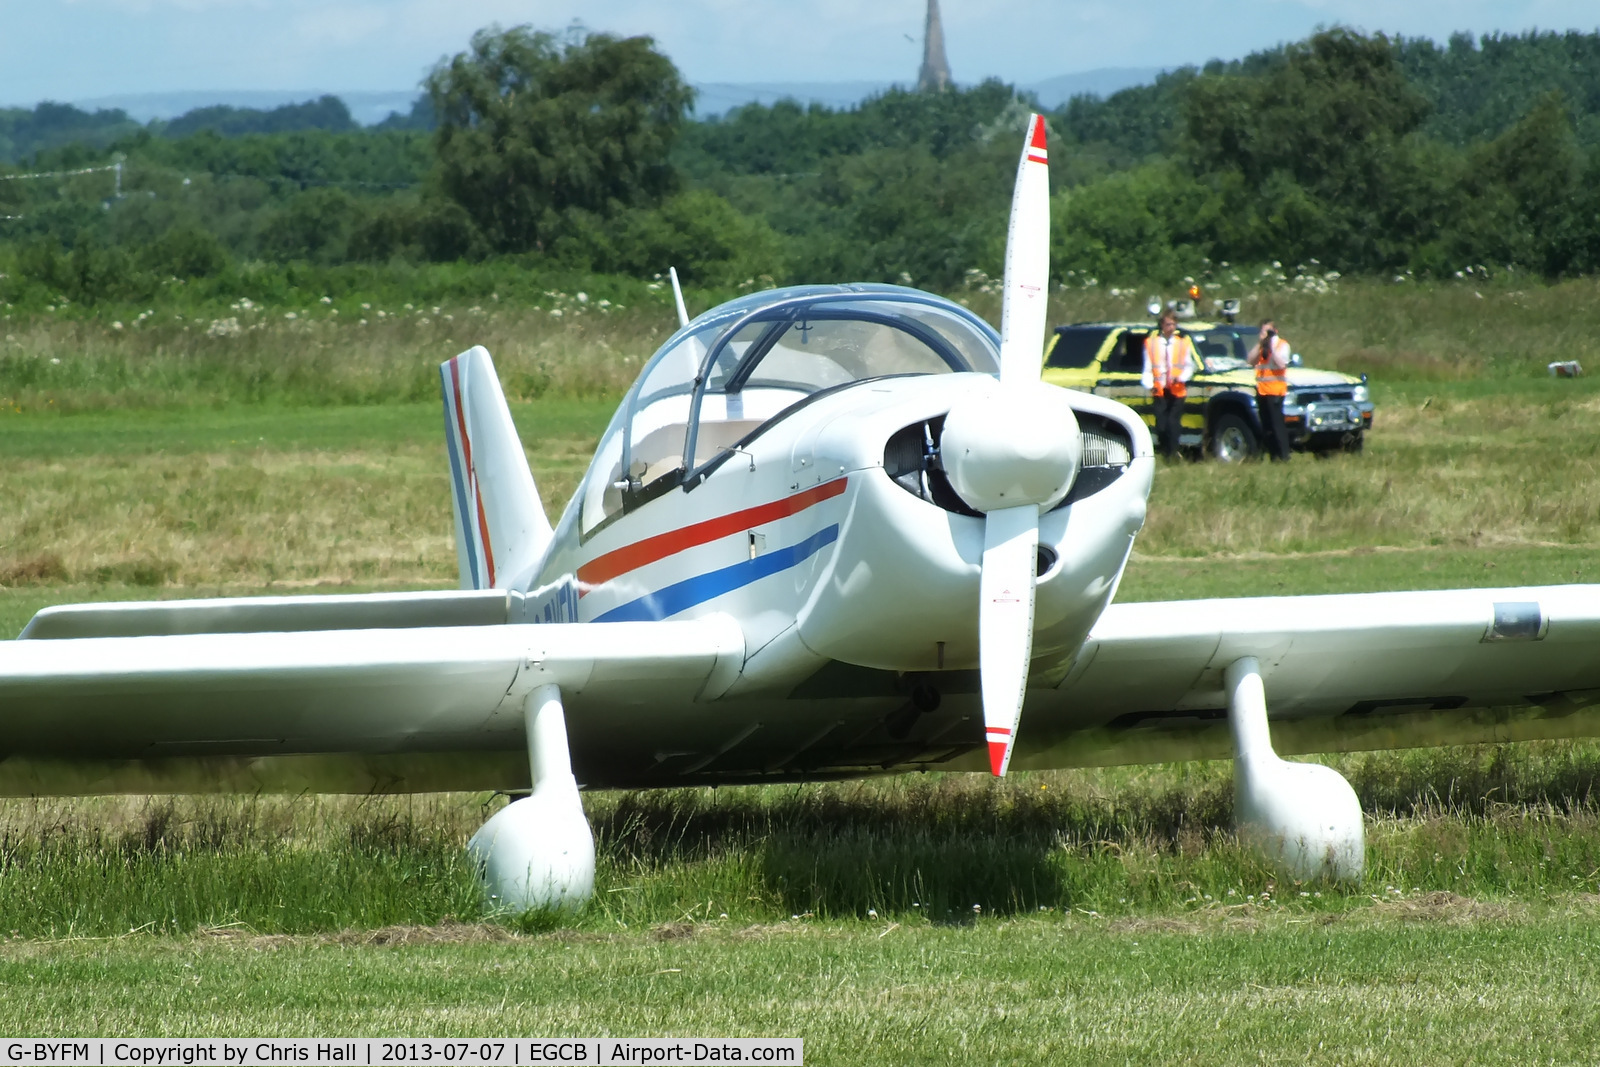 G-BYFM, 2000 Jodel DR-1050 M1 Excellence Replica C/N PFA 304-13237, at the Barton open day and fly in